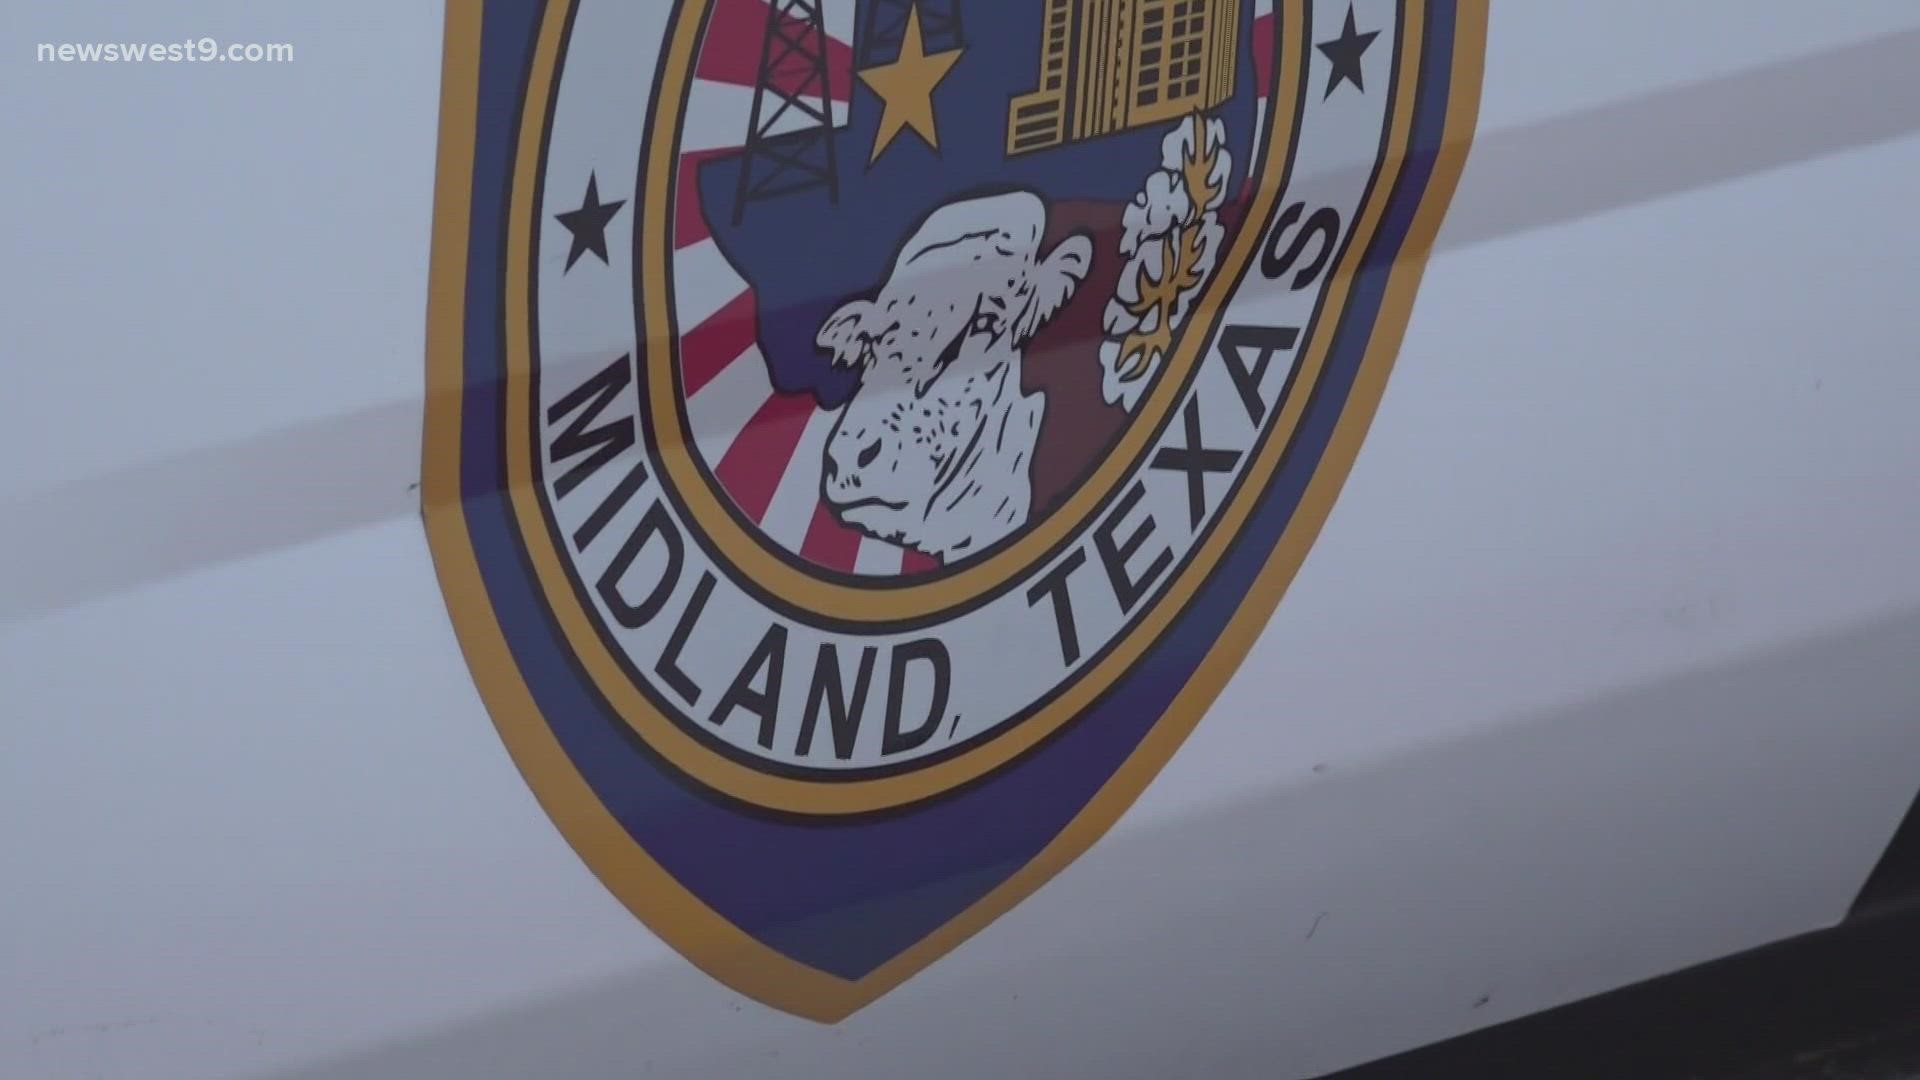 The Midland Police Department currently has 164 officers out of the 195 that they have been allotted.